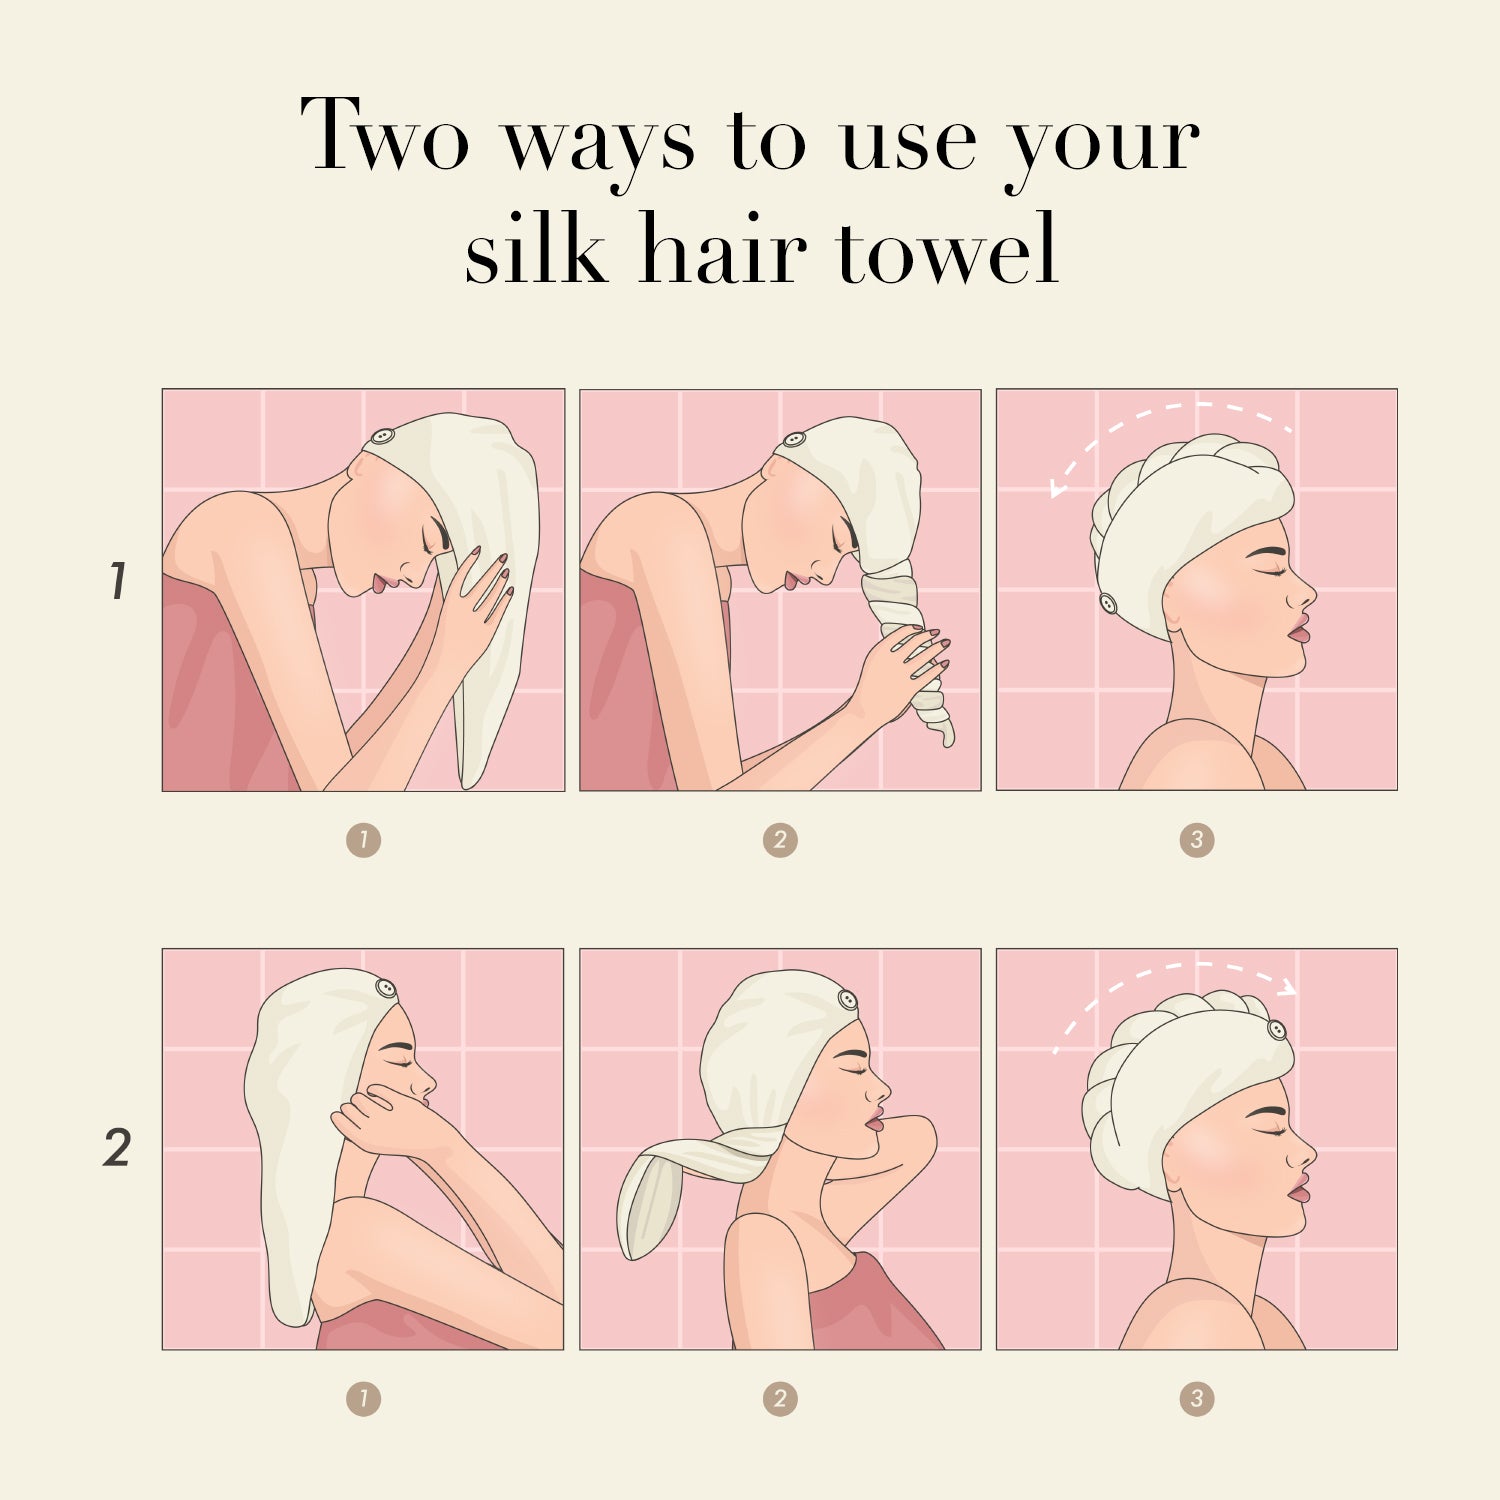 How to use your silk hair towel